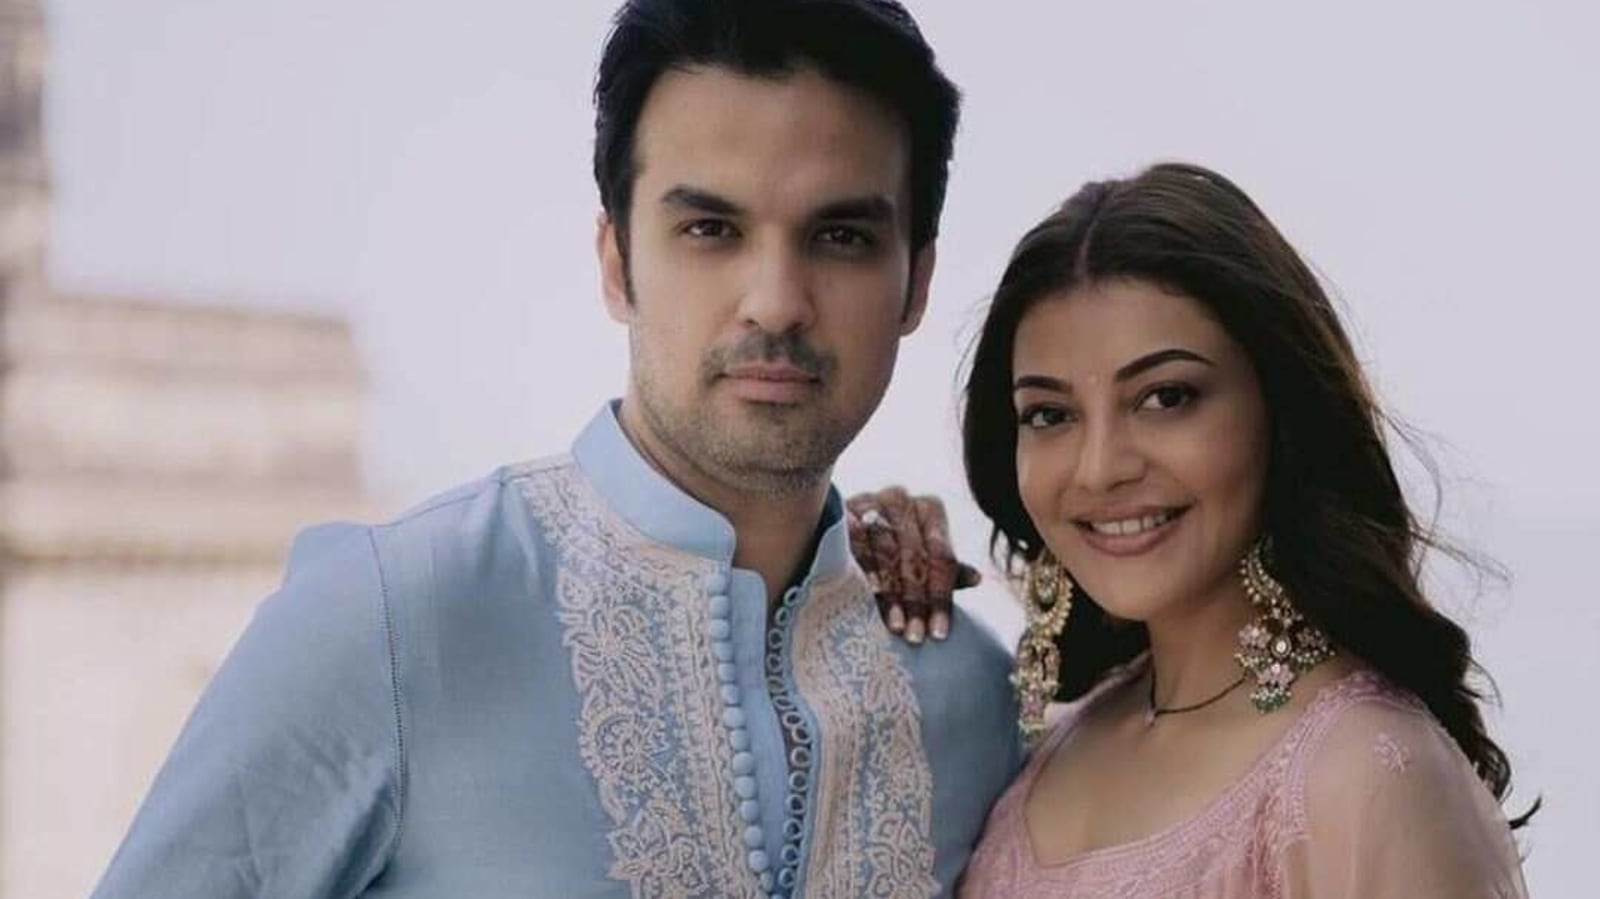 Kajal Agrwal Ki Chudai - Kajal Aggarwal gets 'bribes' from husband Gautam Kitchlu to make up for  lack of quality time with her. See photo | Bollywood - Hindustan Times